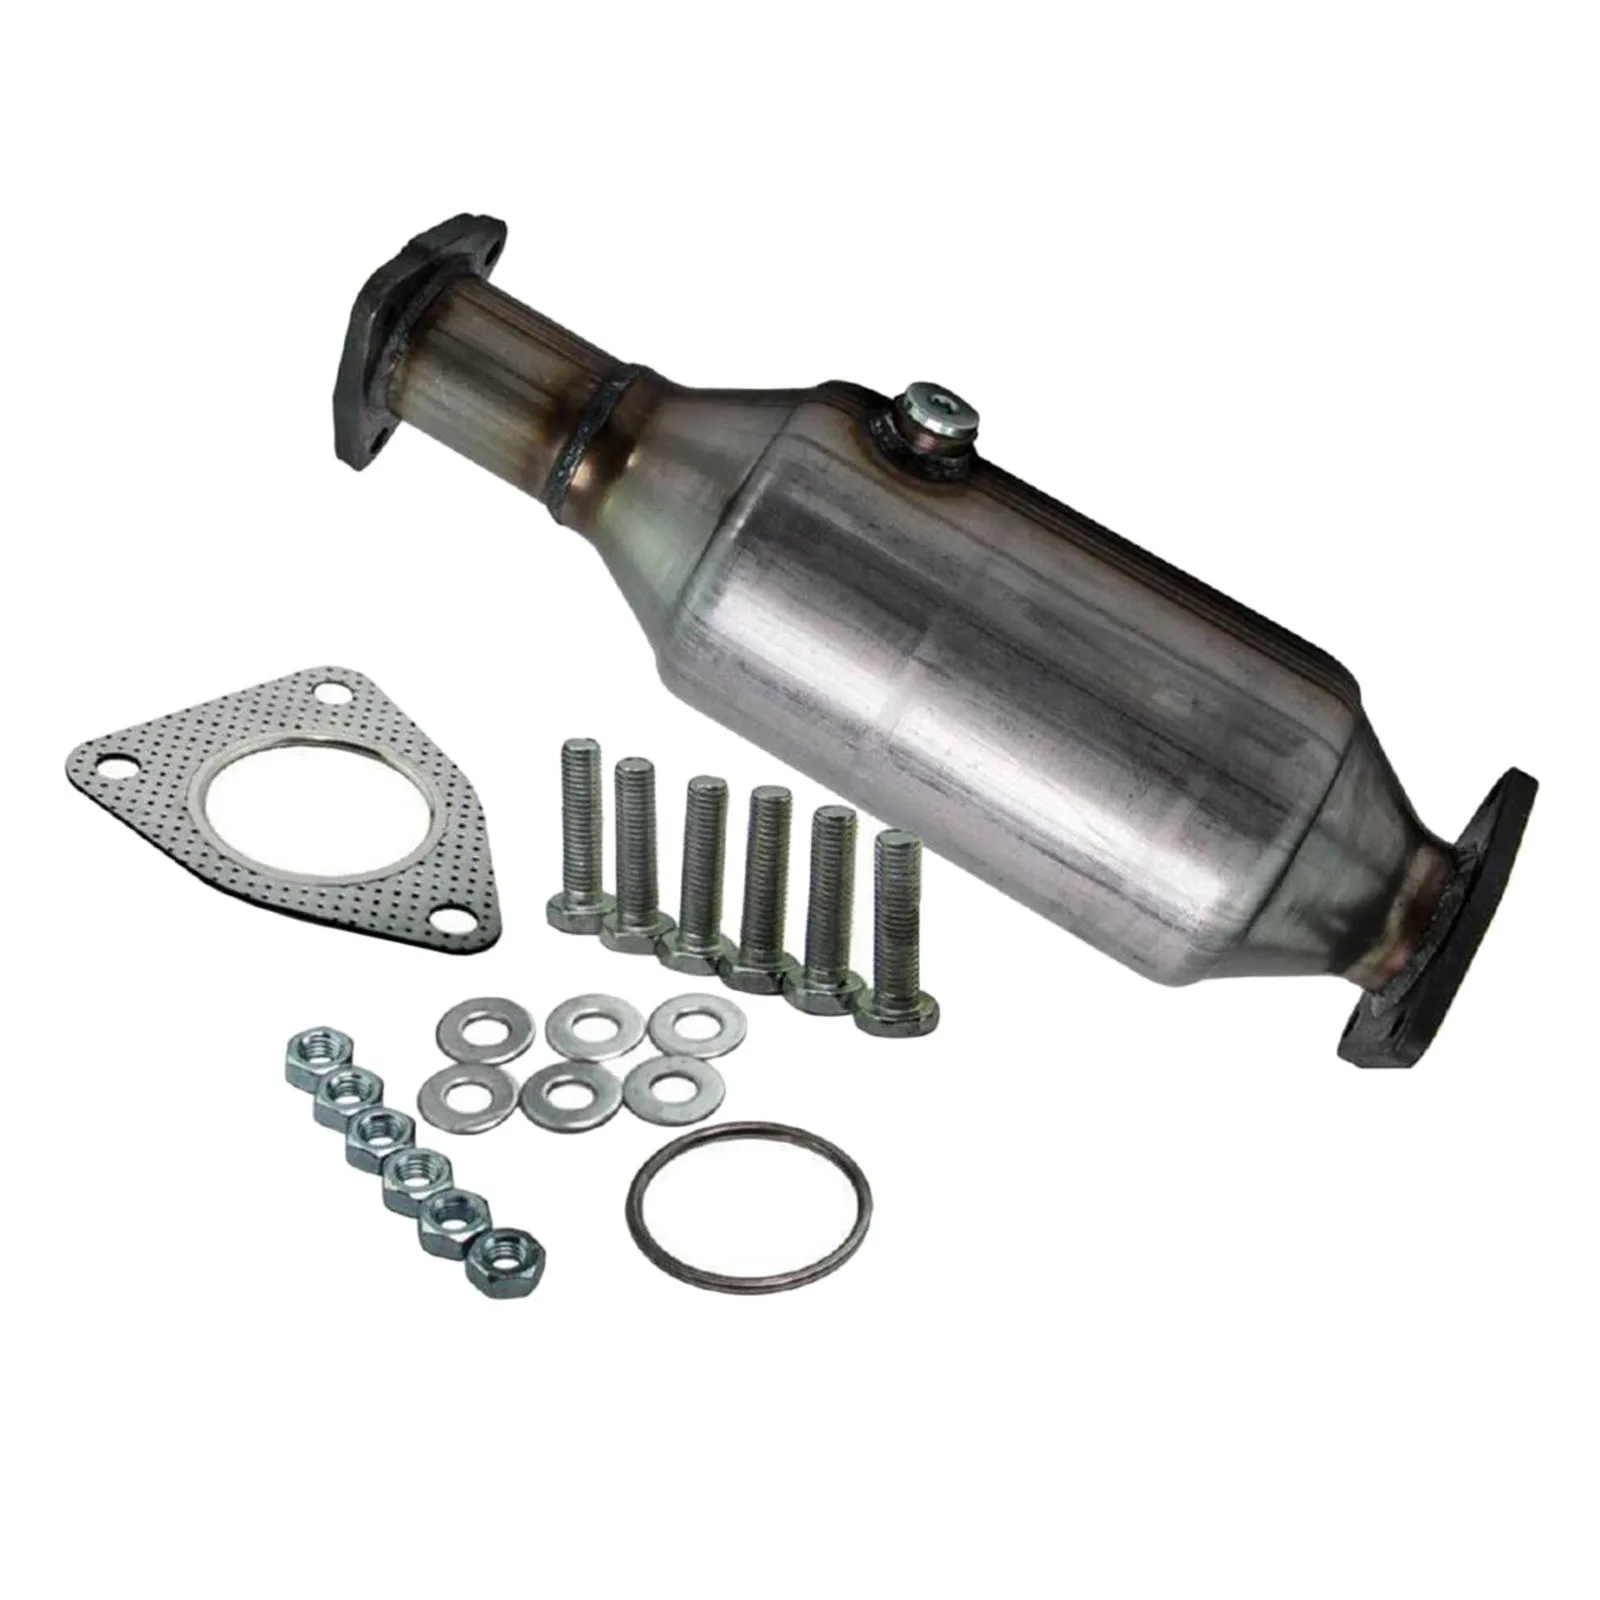 Catalytic Converter Compatible with 1998-2002 Honda Accord 2.3L High Flow Series Flange Design Includes Bolts and Gasket